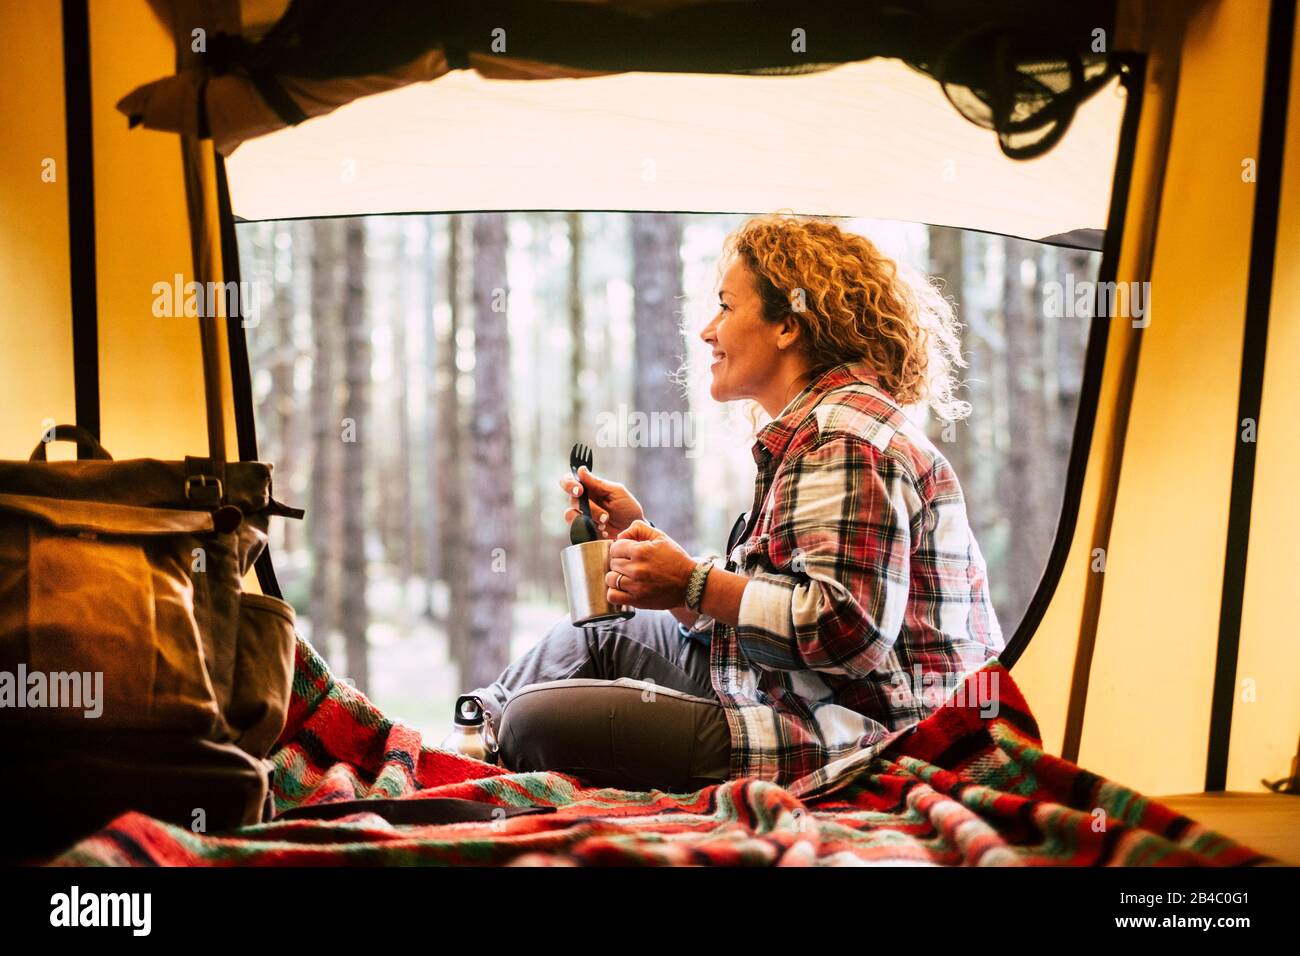 Camping with tent and adventure alternative travel vacation concept with cheerful people - beautiful adult blonde smile and enjoy the outdoors nature around in the forest sit down near a backpack and drinking coffee Stock Photo